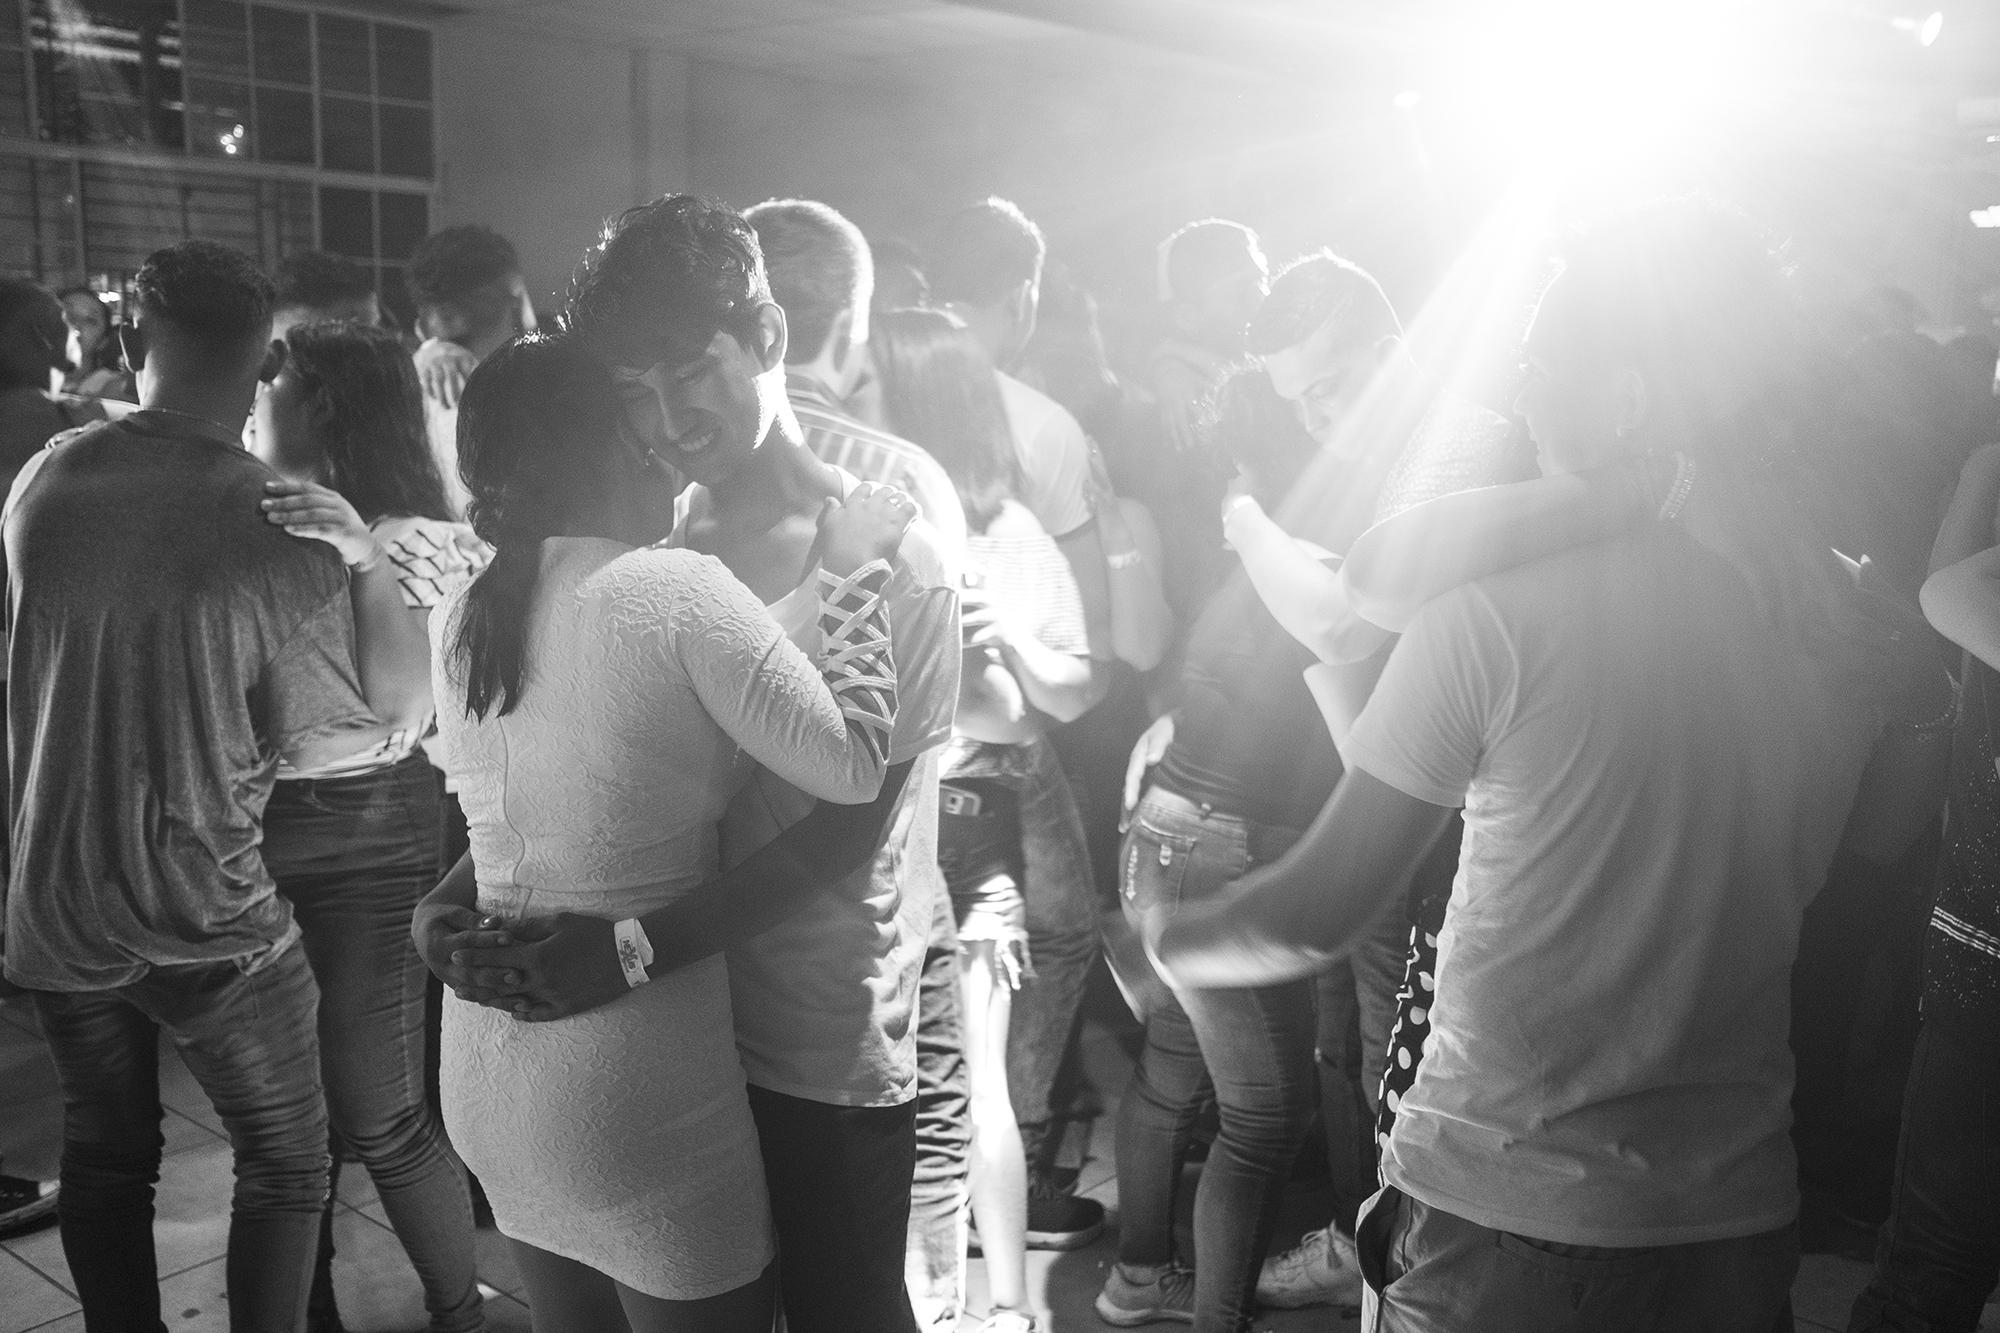 On the night of October 10, 2019, Santa Marta celebrated life. To close out the night, a DJ played romántica music from the eighties. “¡Qué viva Santa Marta!,” the DJ yells, while couples dance in each other’s arms.